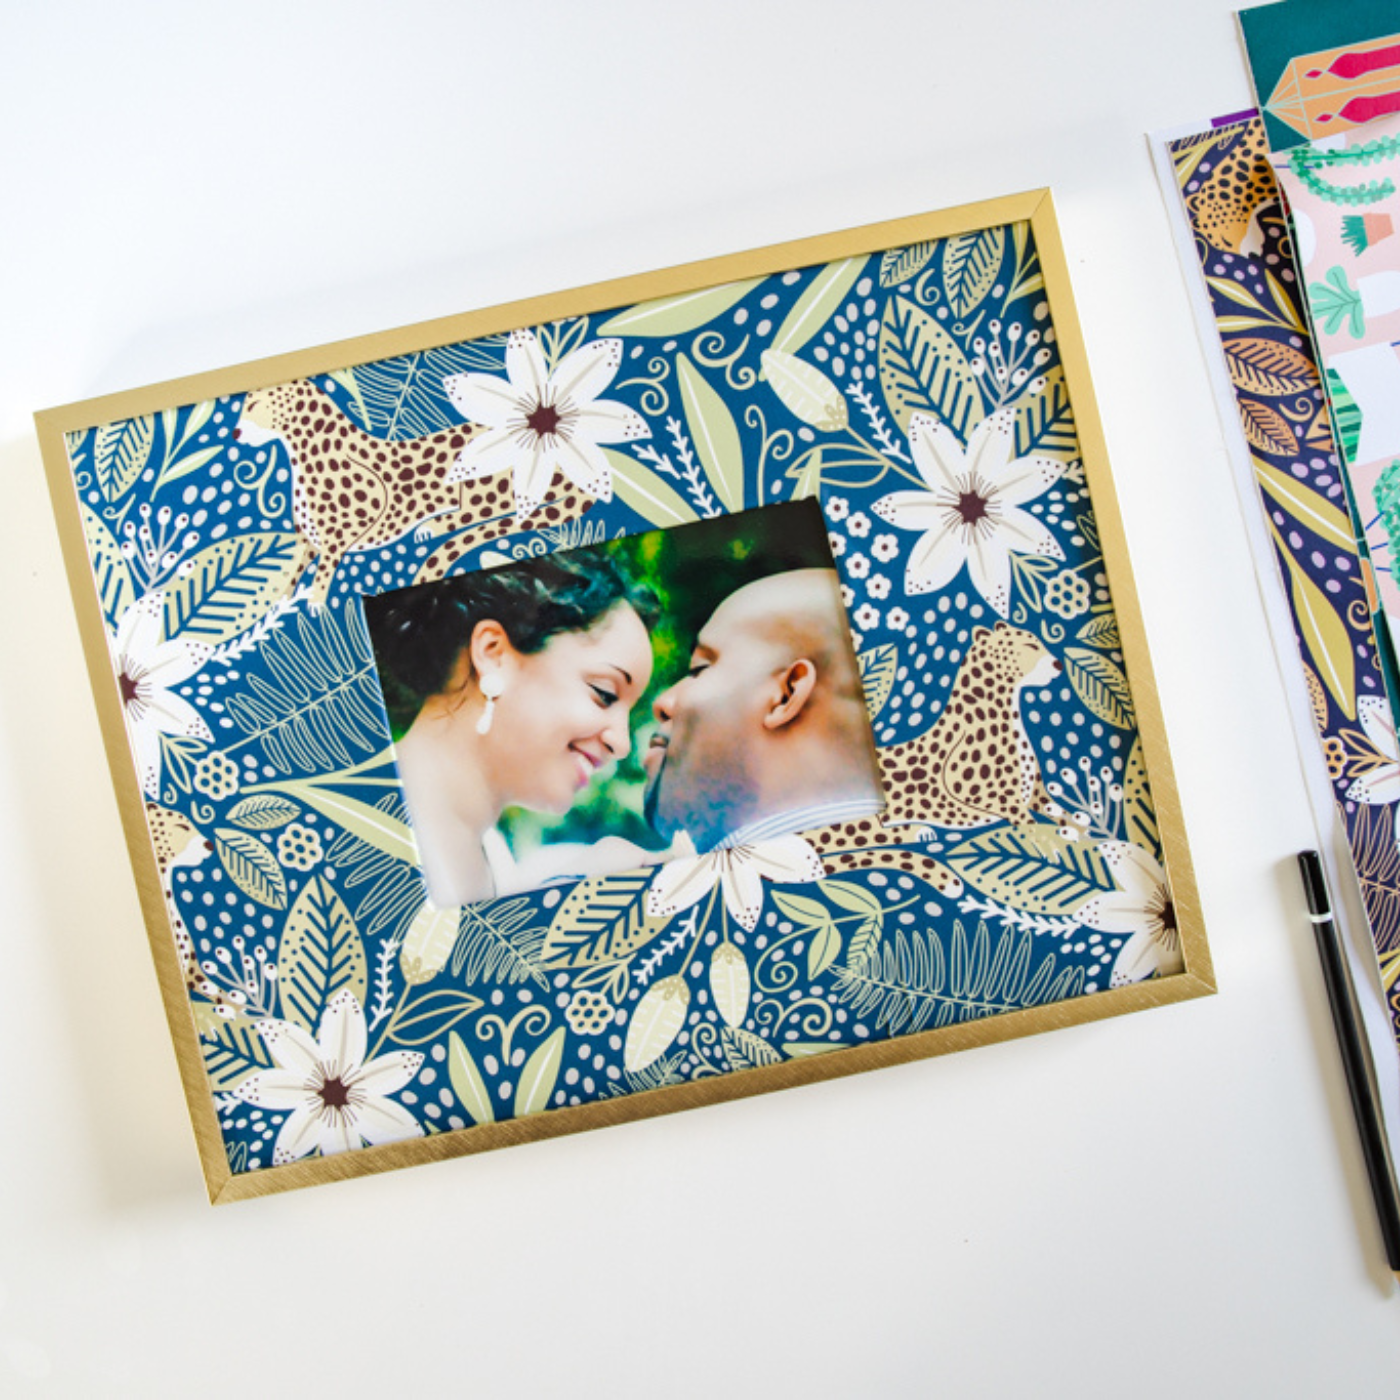 A photo of two people standing with their faces close together sits in a photo frame with a peel-and-stick wallpaper border. The print on the wallpaper features leopards and bright blue flowers as well as white flowers. The photo frame is sitting on a white table next to a black pen and several pieces of brightly colored paper.